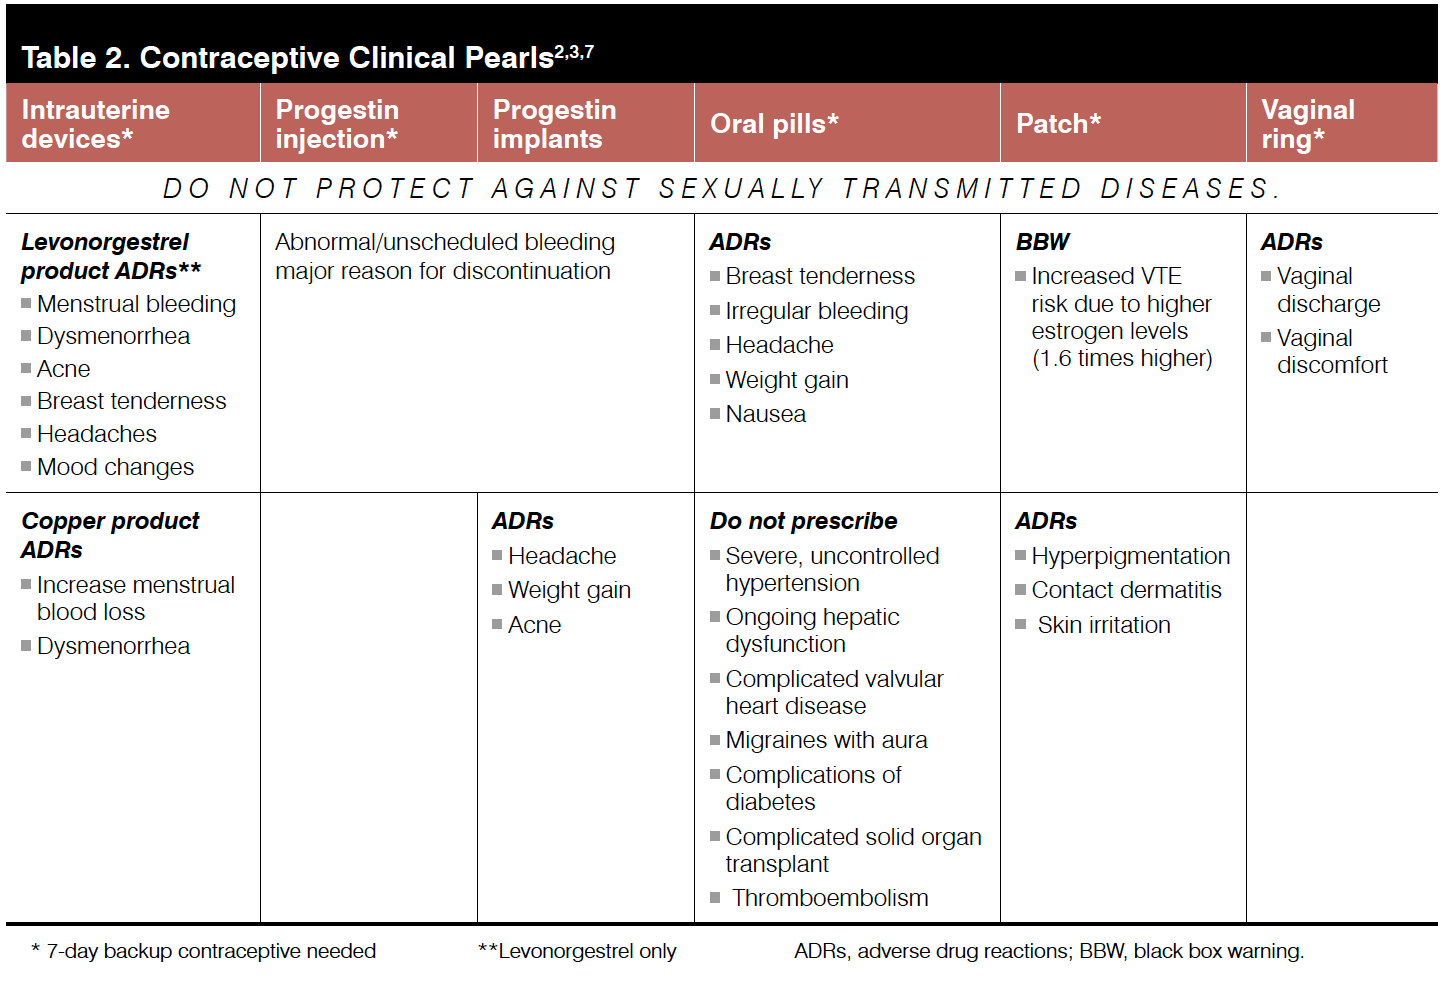 Contraceptive Clinical Pearls